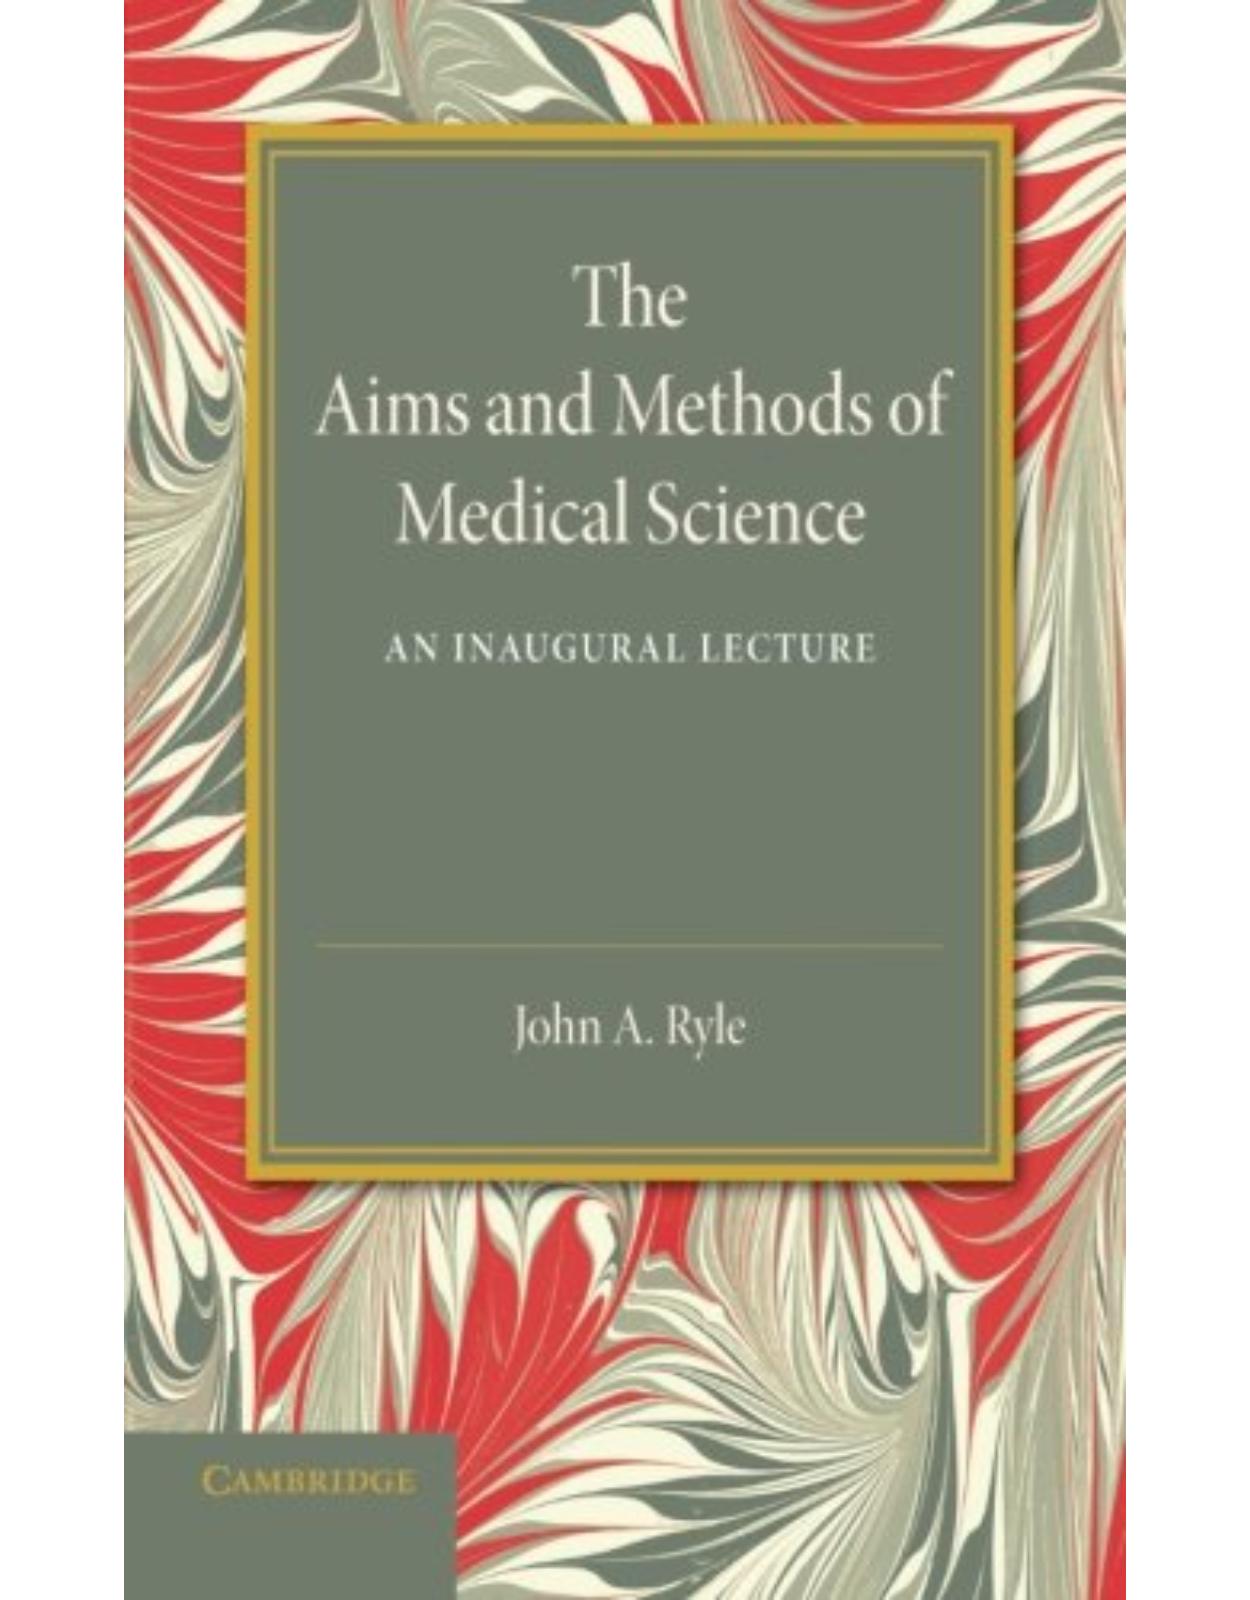 The Aims and Methods of Medical Science: An Inaugural Lecture